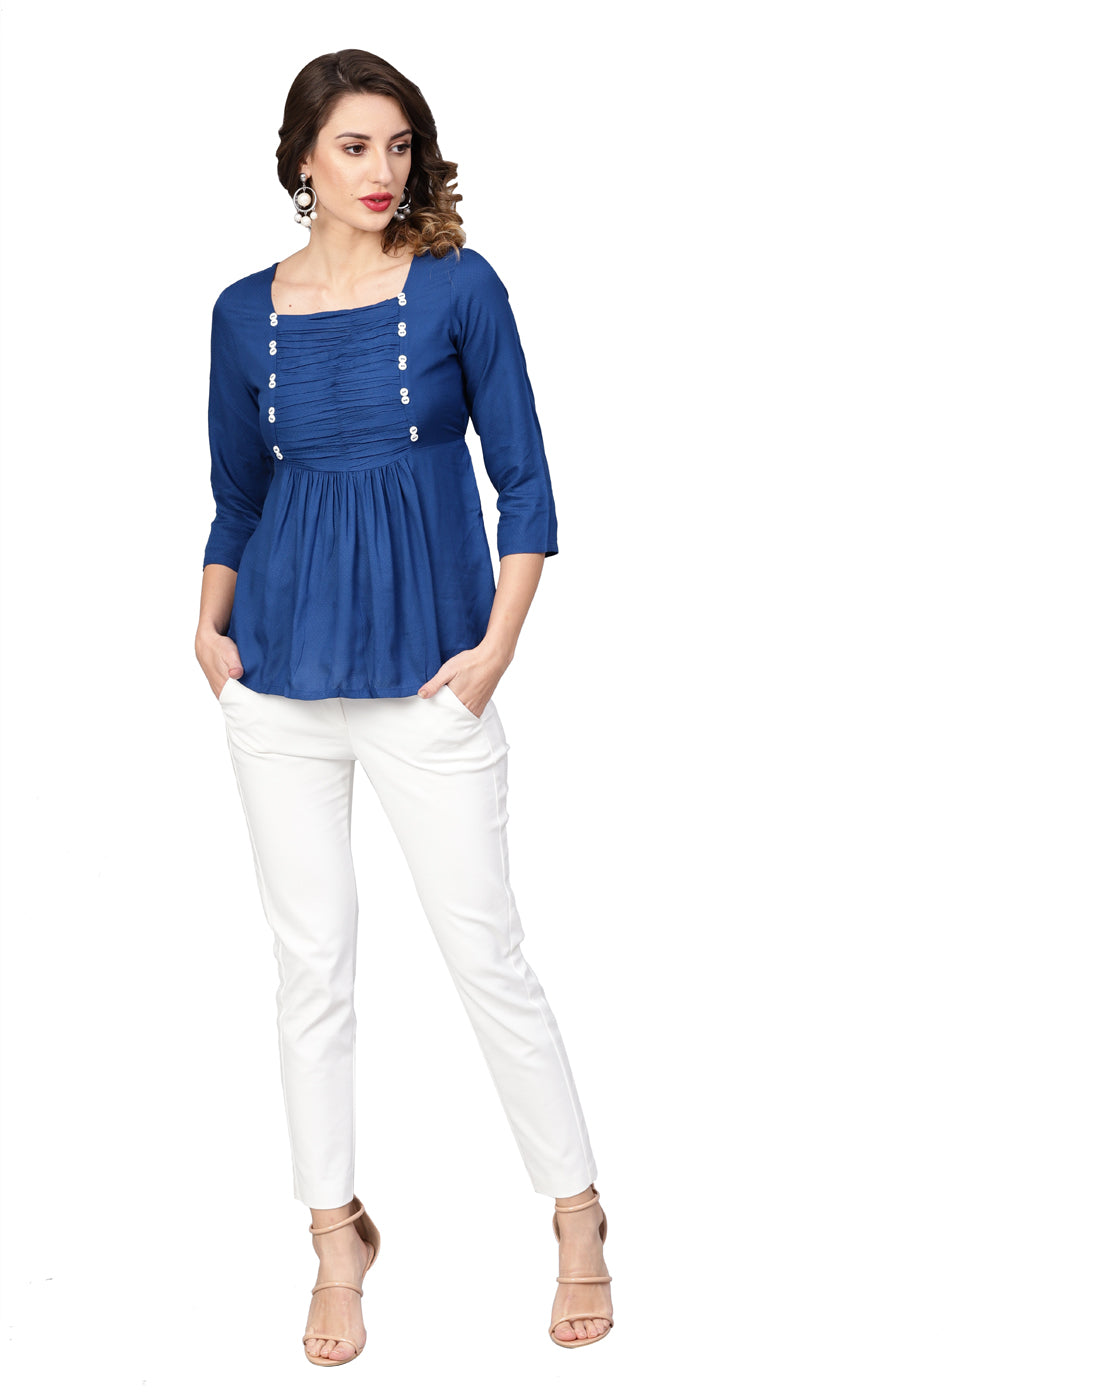 women dotted rayon dobby solid regular top blue